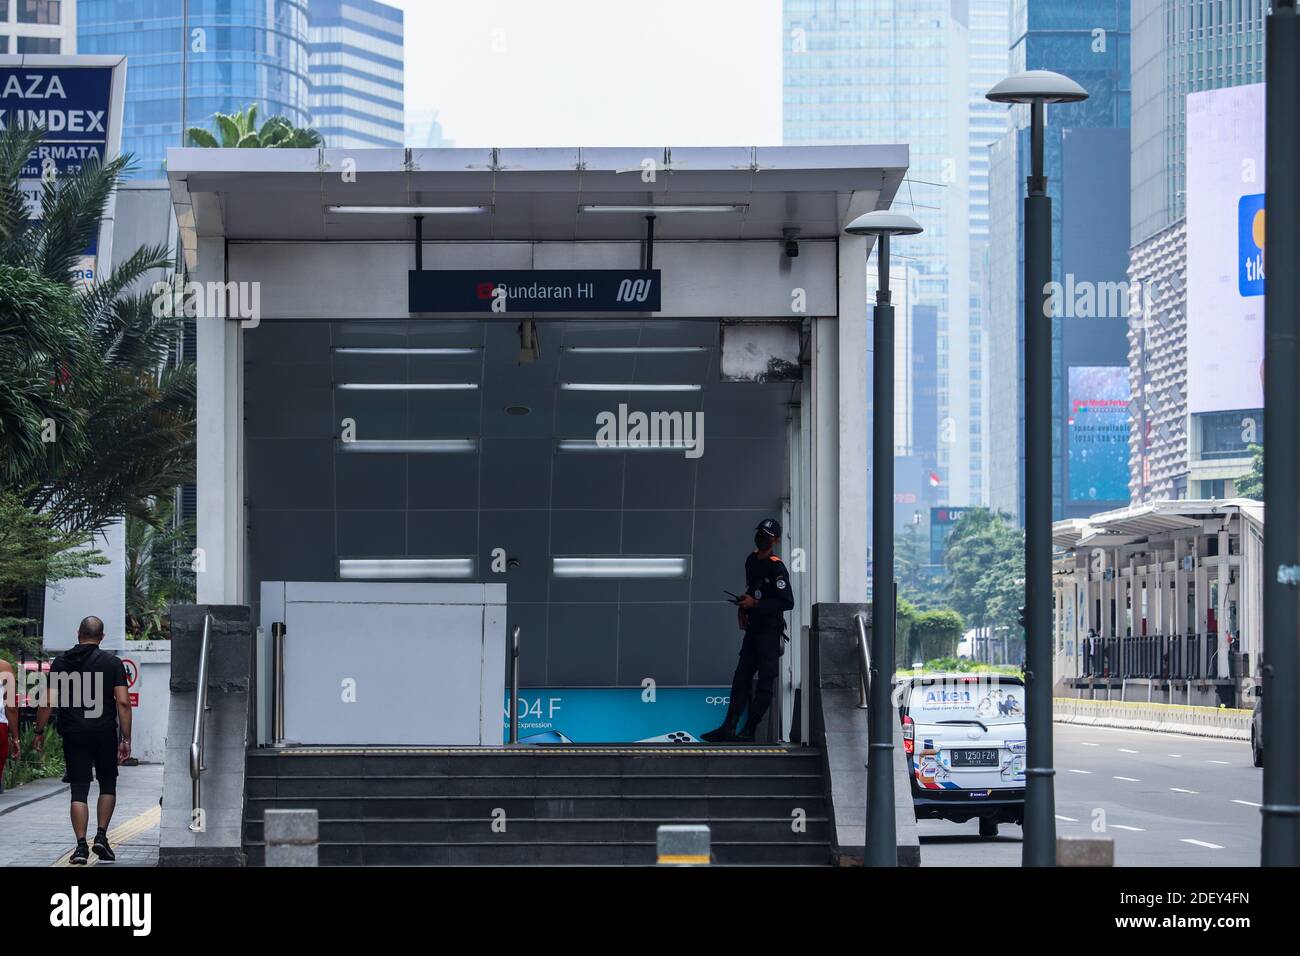 Jakarta / Indonesia - 25 October 2020. The entrance of the Jakarta MRT Station is located at the HI roundabout with security on guard at the entrance. Stock Photo